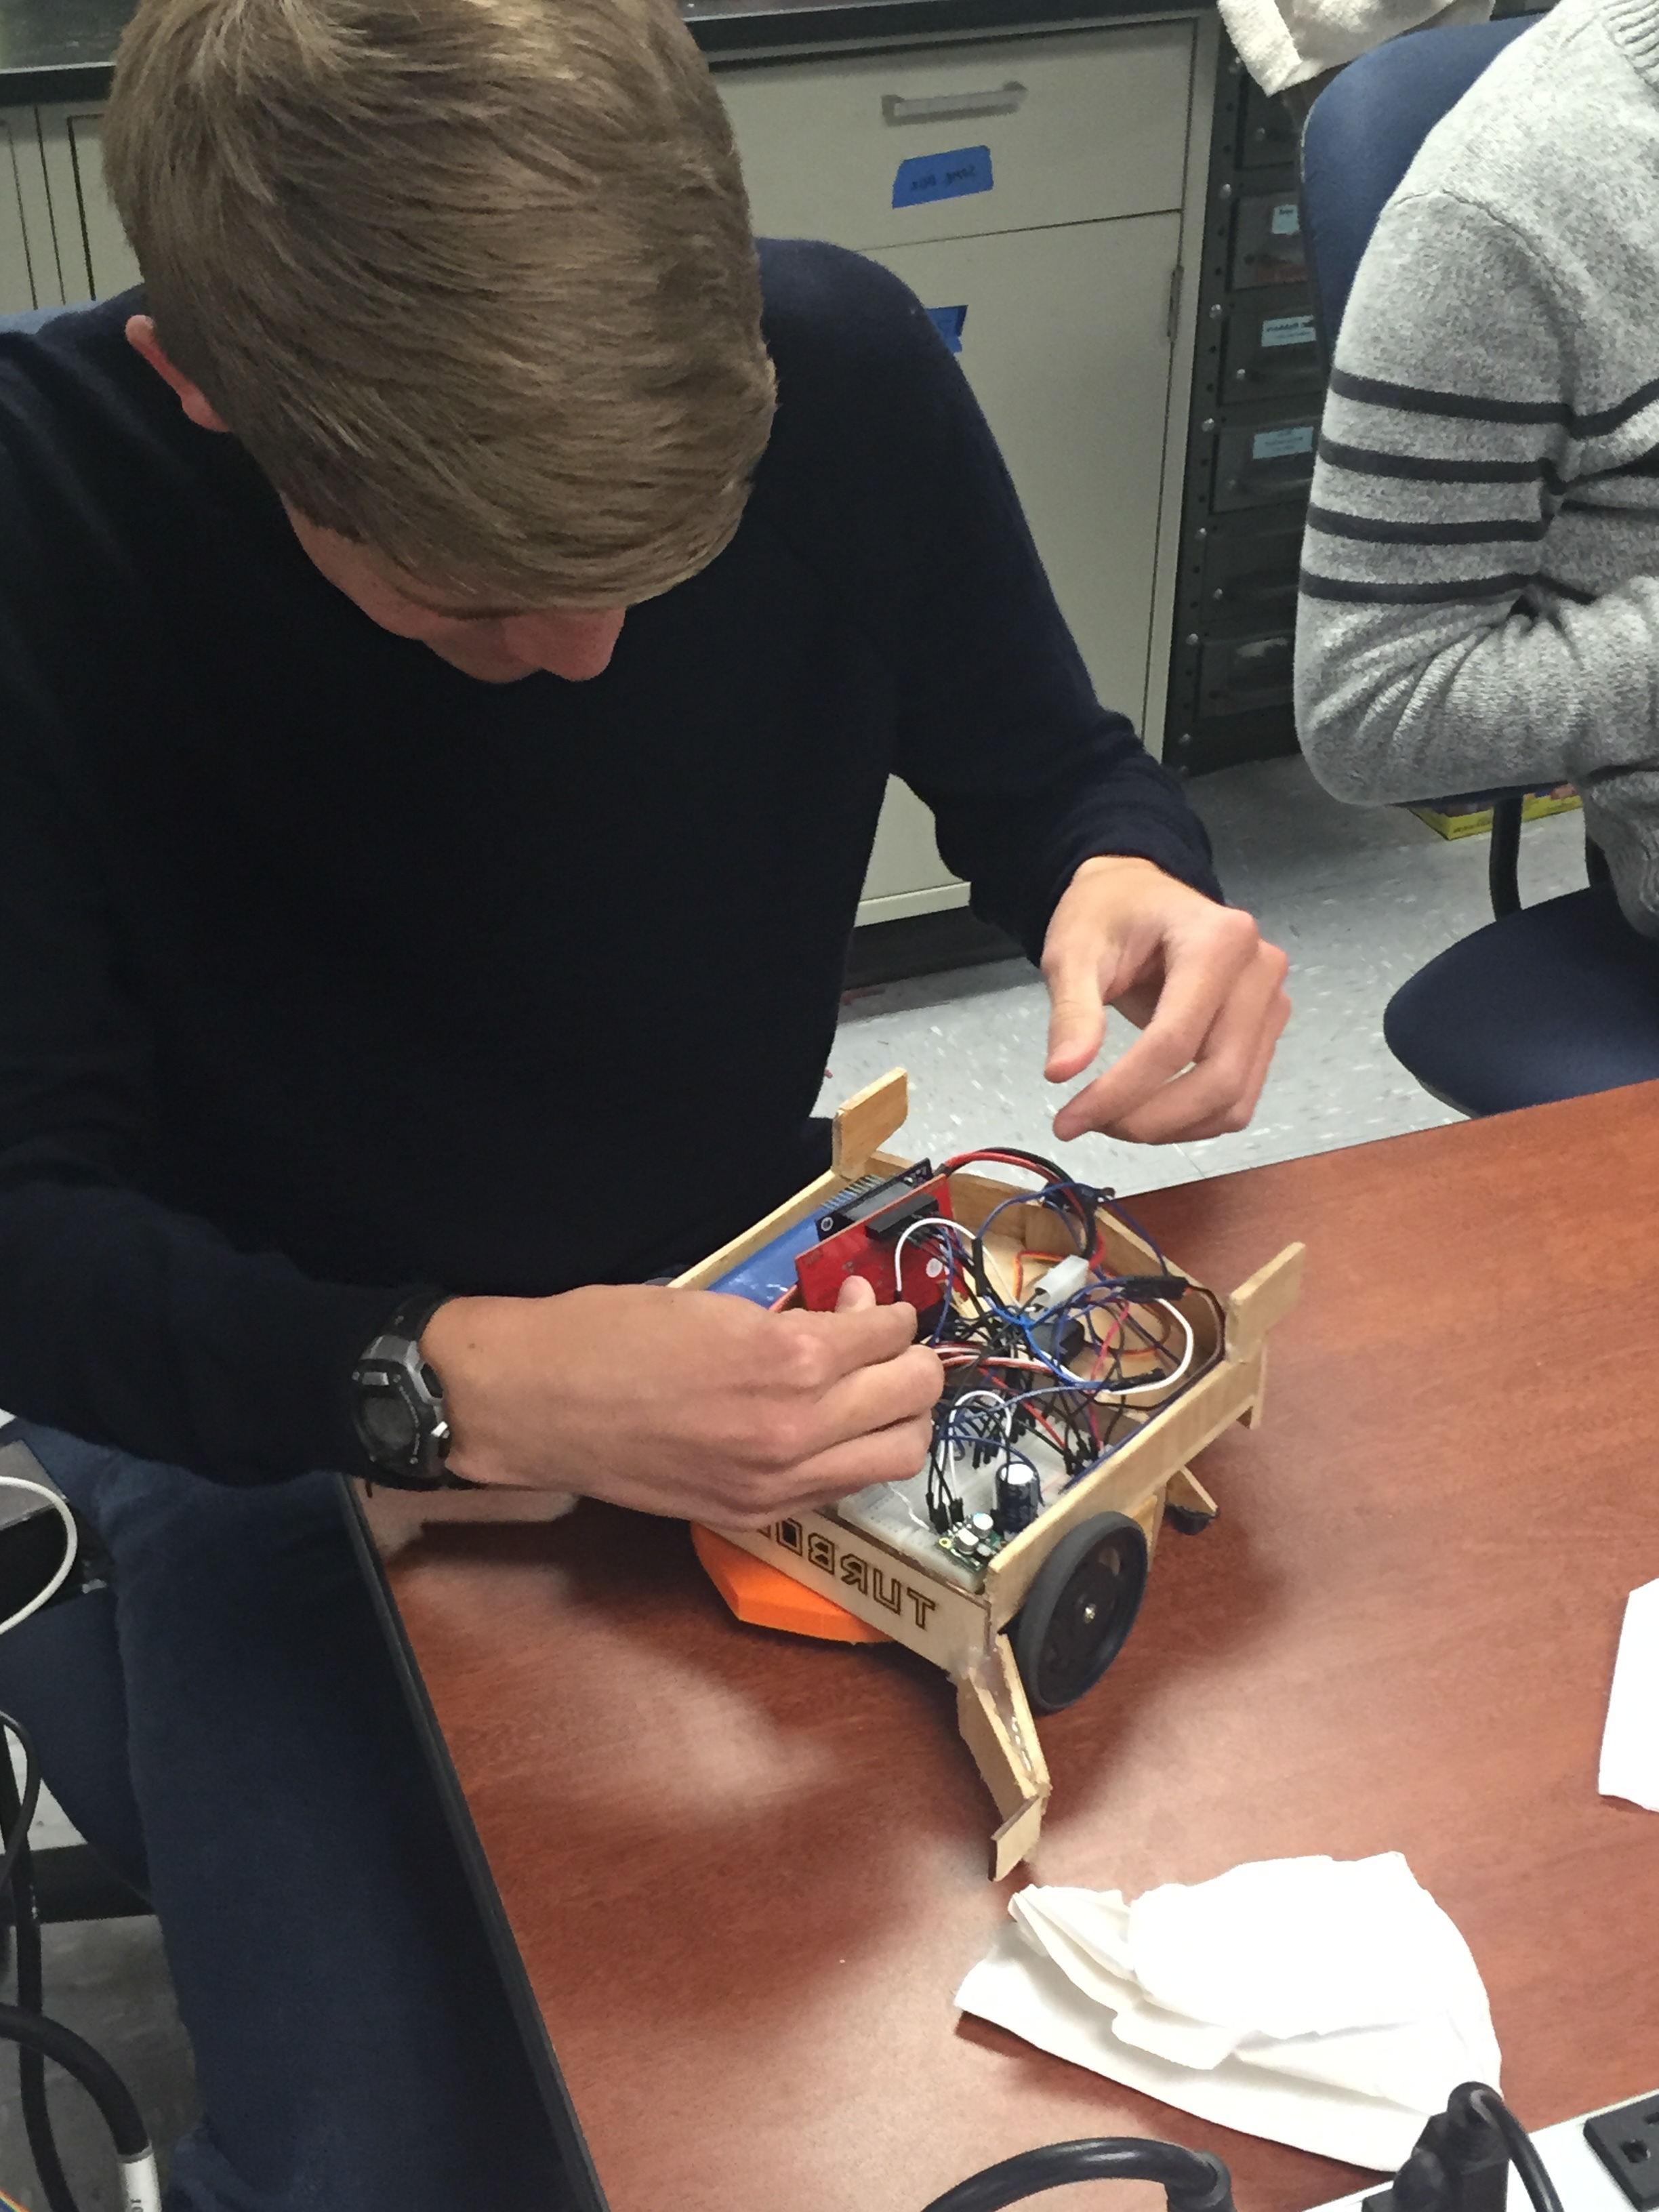 Turbolifts member Mark working on Robot